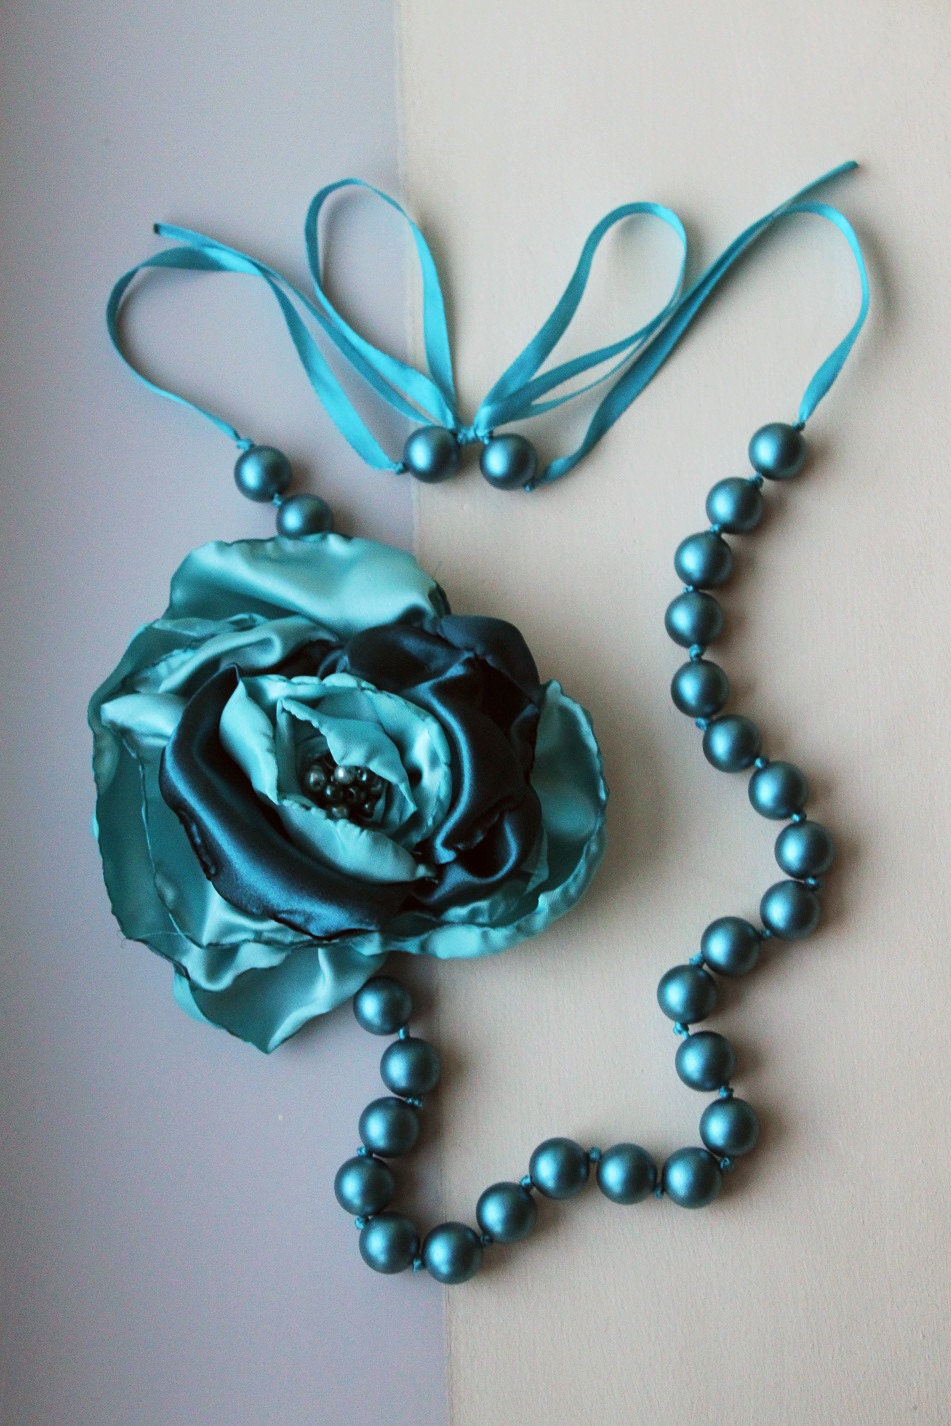 Blue Teal Wood Beads Ribbon Necklace with a Satin Blue Teal Flower - TealAndMagenta